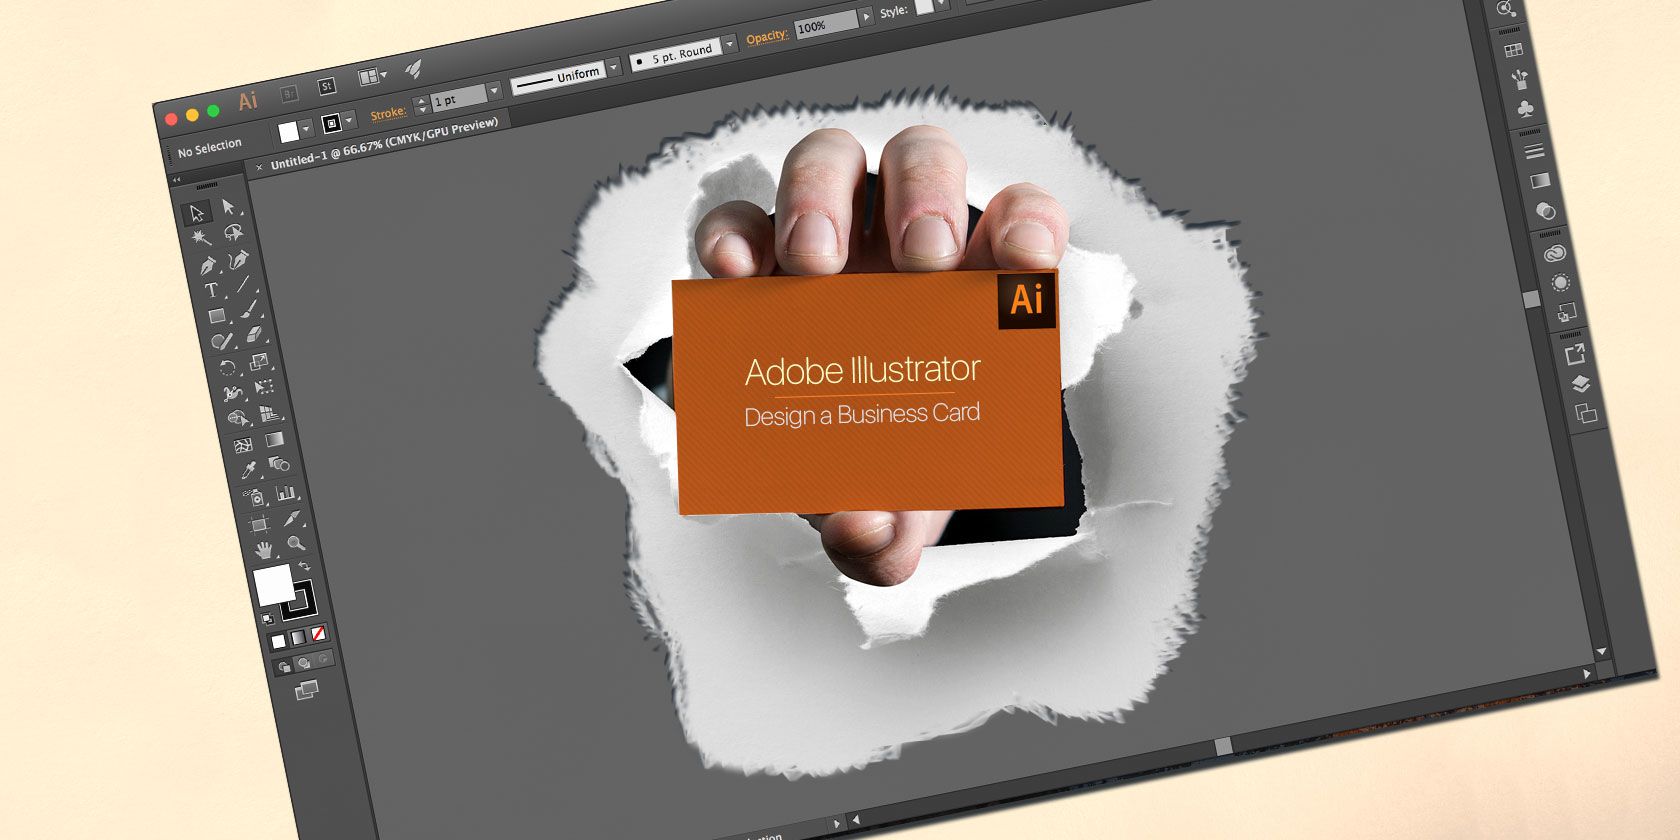 How to Design a Business Card in Adobe Illustrator